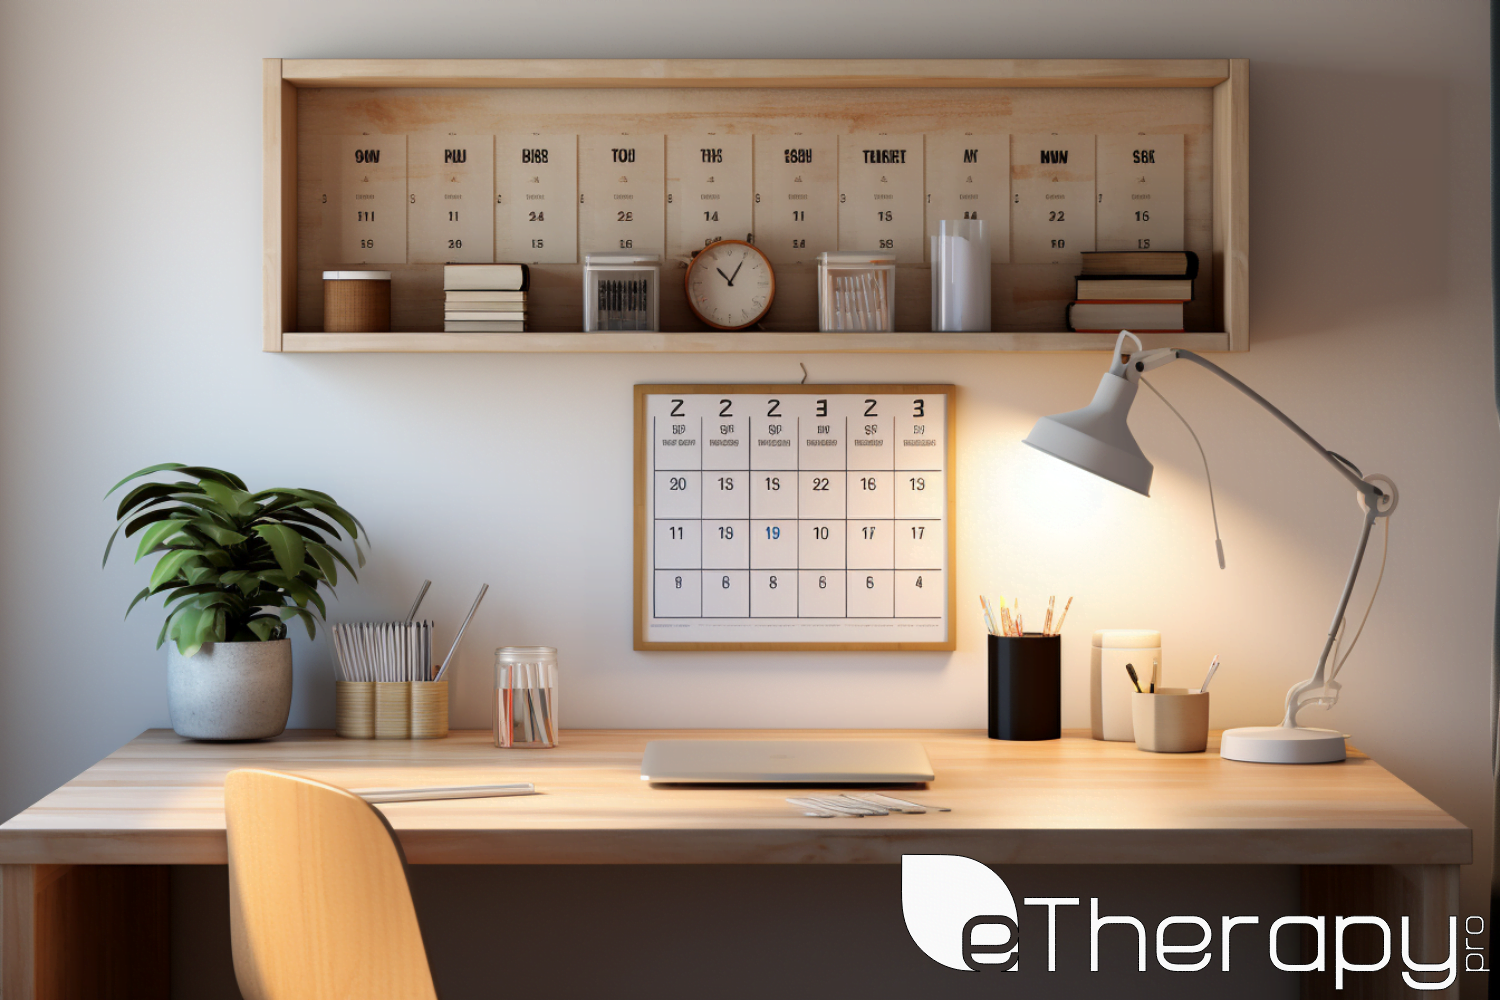 An organized workspace with a clear desk - Treatment and Management of ADHD